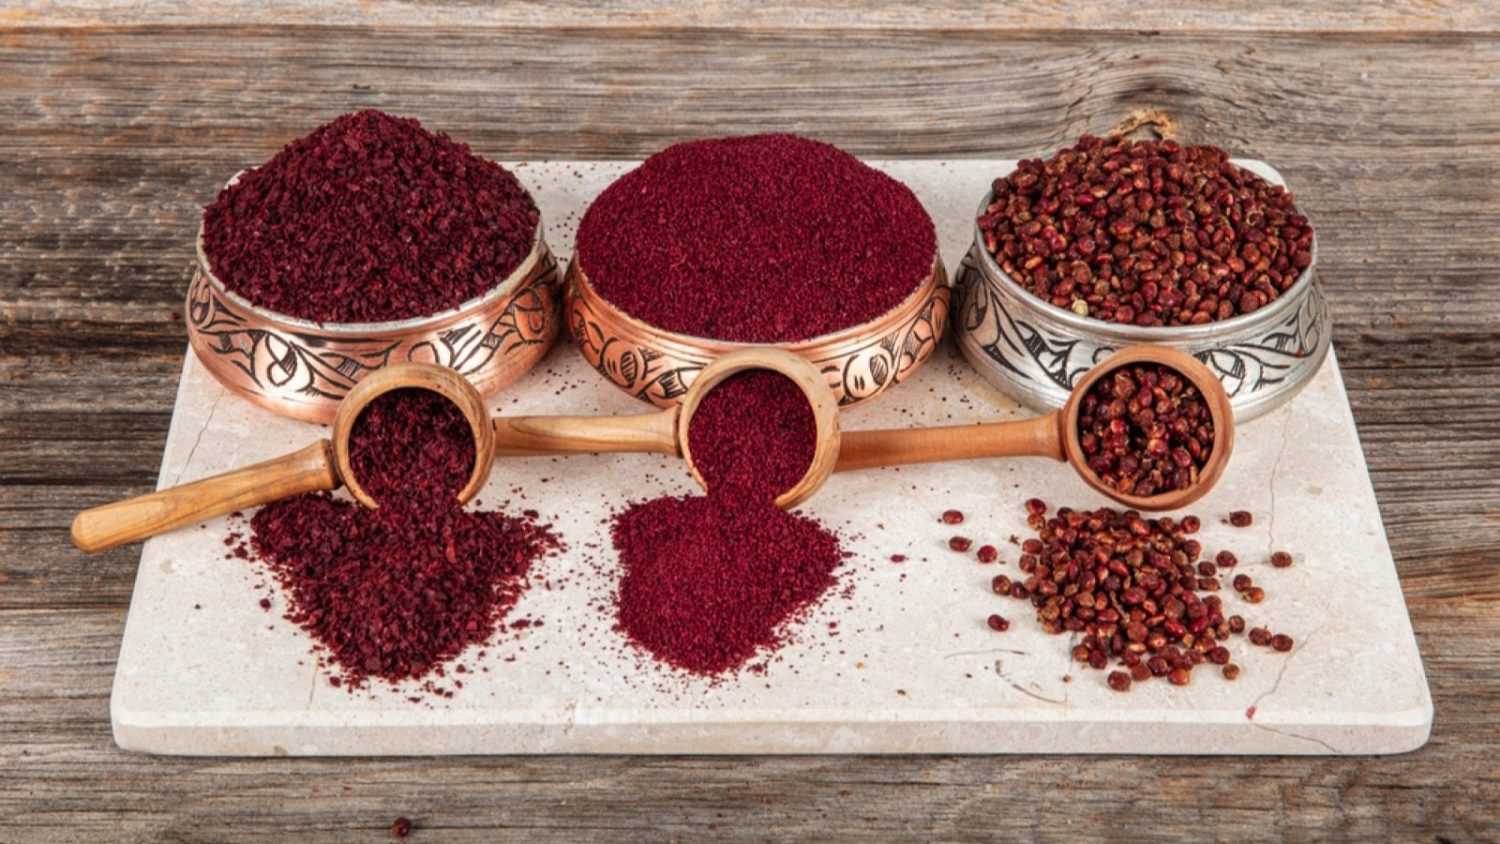 Dry spice sumac in a wooden spoon. Ground sumac spice. Dried ground red Sumac powder spices in wooden spoon with sumac berries on rustic table. Healthy food concept.